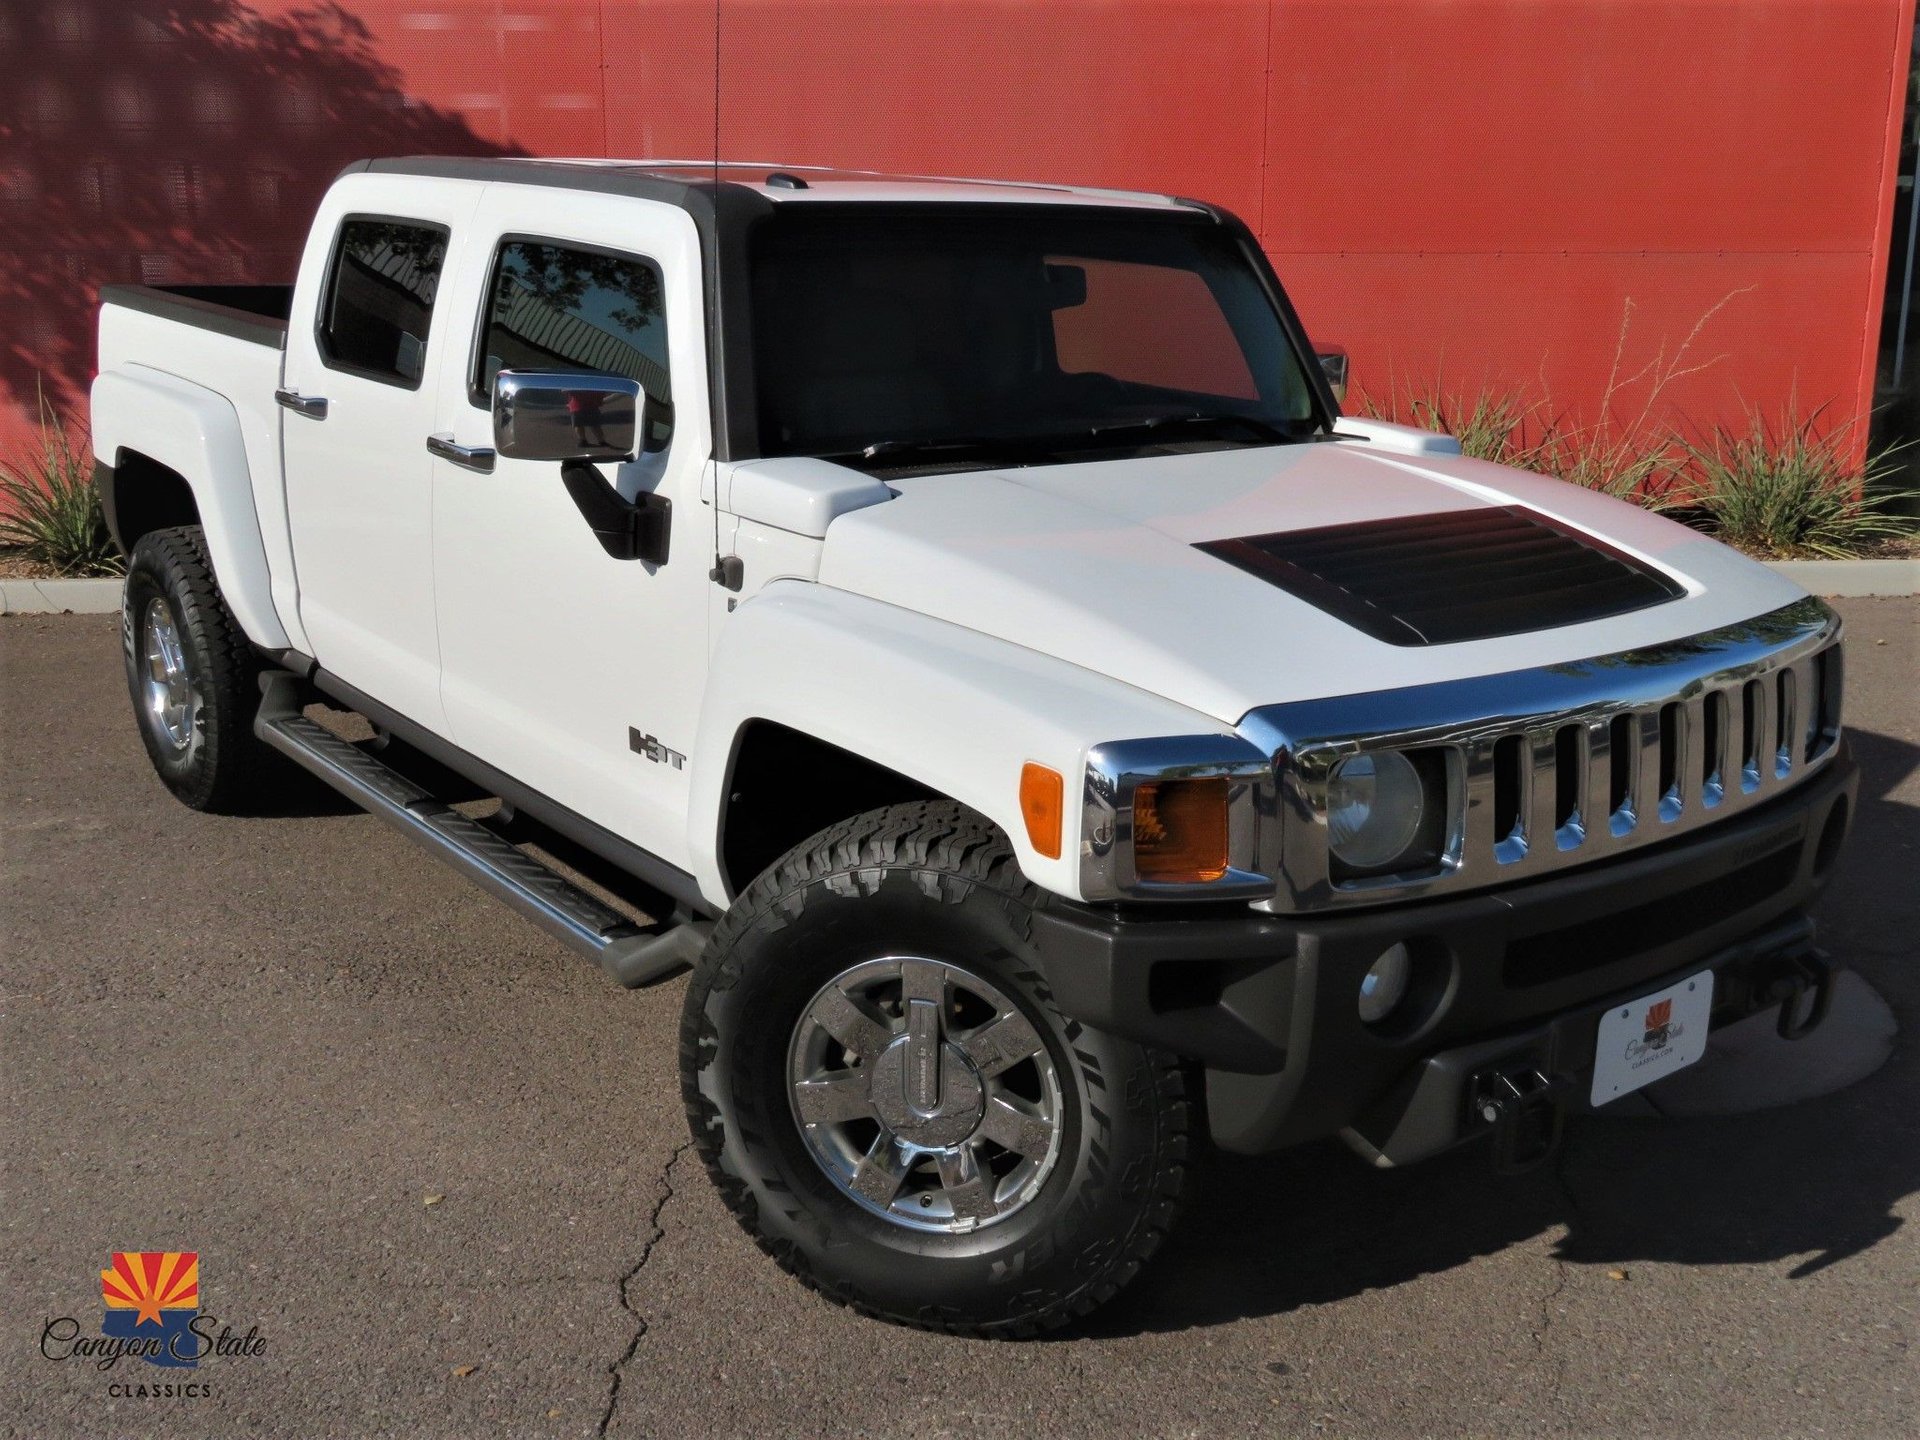 2009 HUMMER H3 | Canyon State Classics